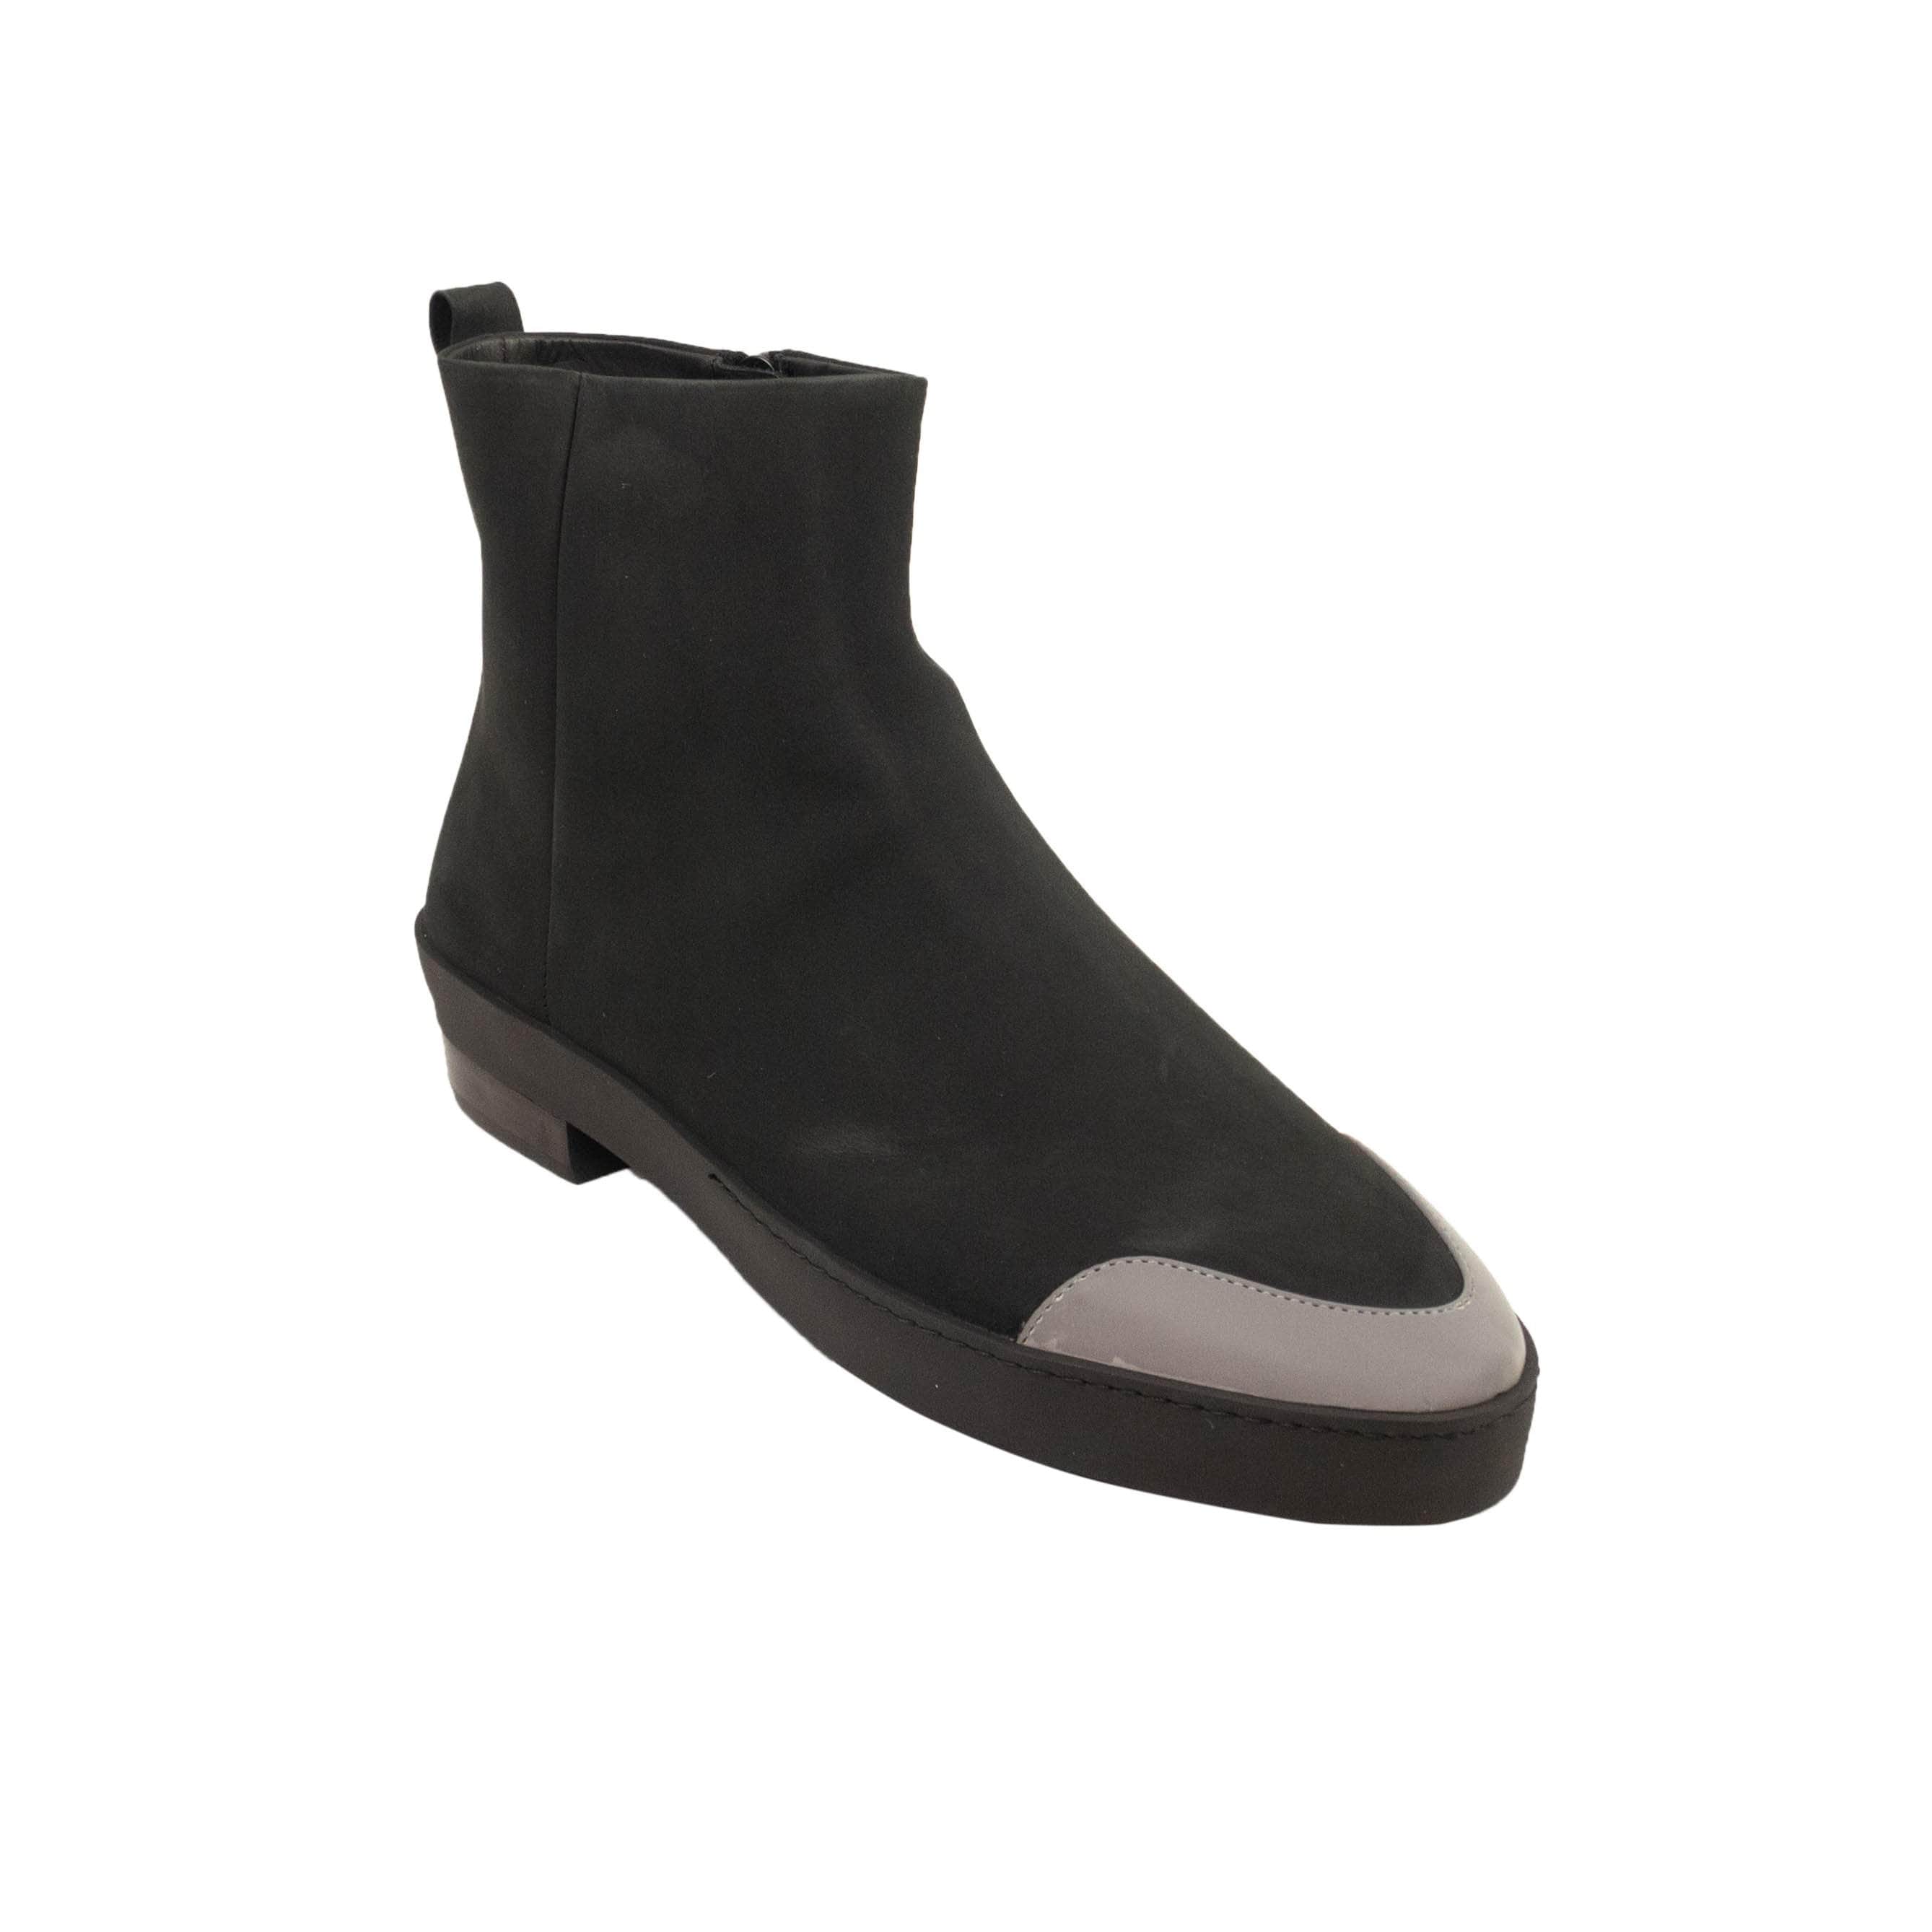 Fear Of God 500-750, channelenable-all, chicmi, couponcollection, fear-of-god, gender-mens, main-shoes, mens-ankle-boots, mens-shoes, size-40, size-41, size-42, size-43, size-44, size-45, size-46, size-47 Black Chelsea Santa Fe Ankle Boots